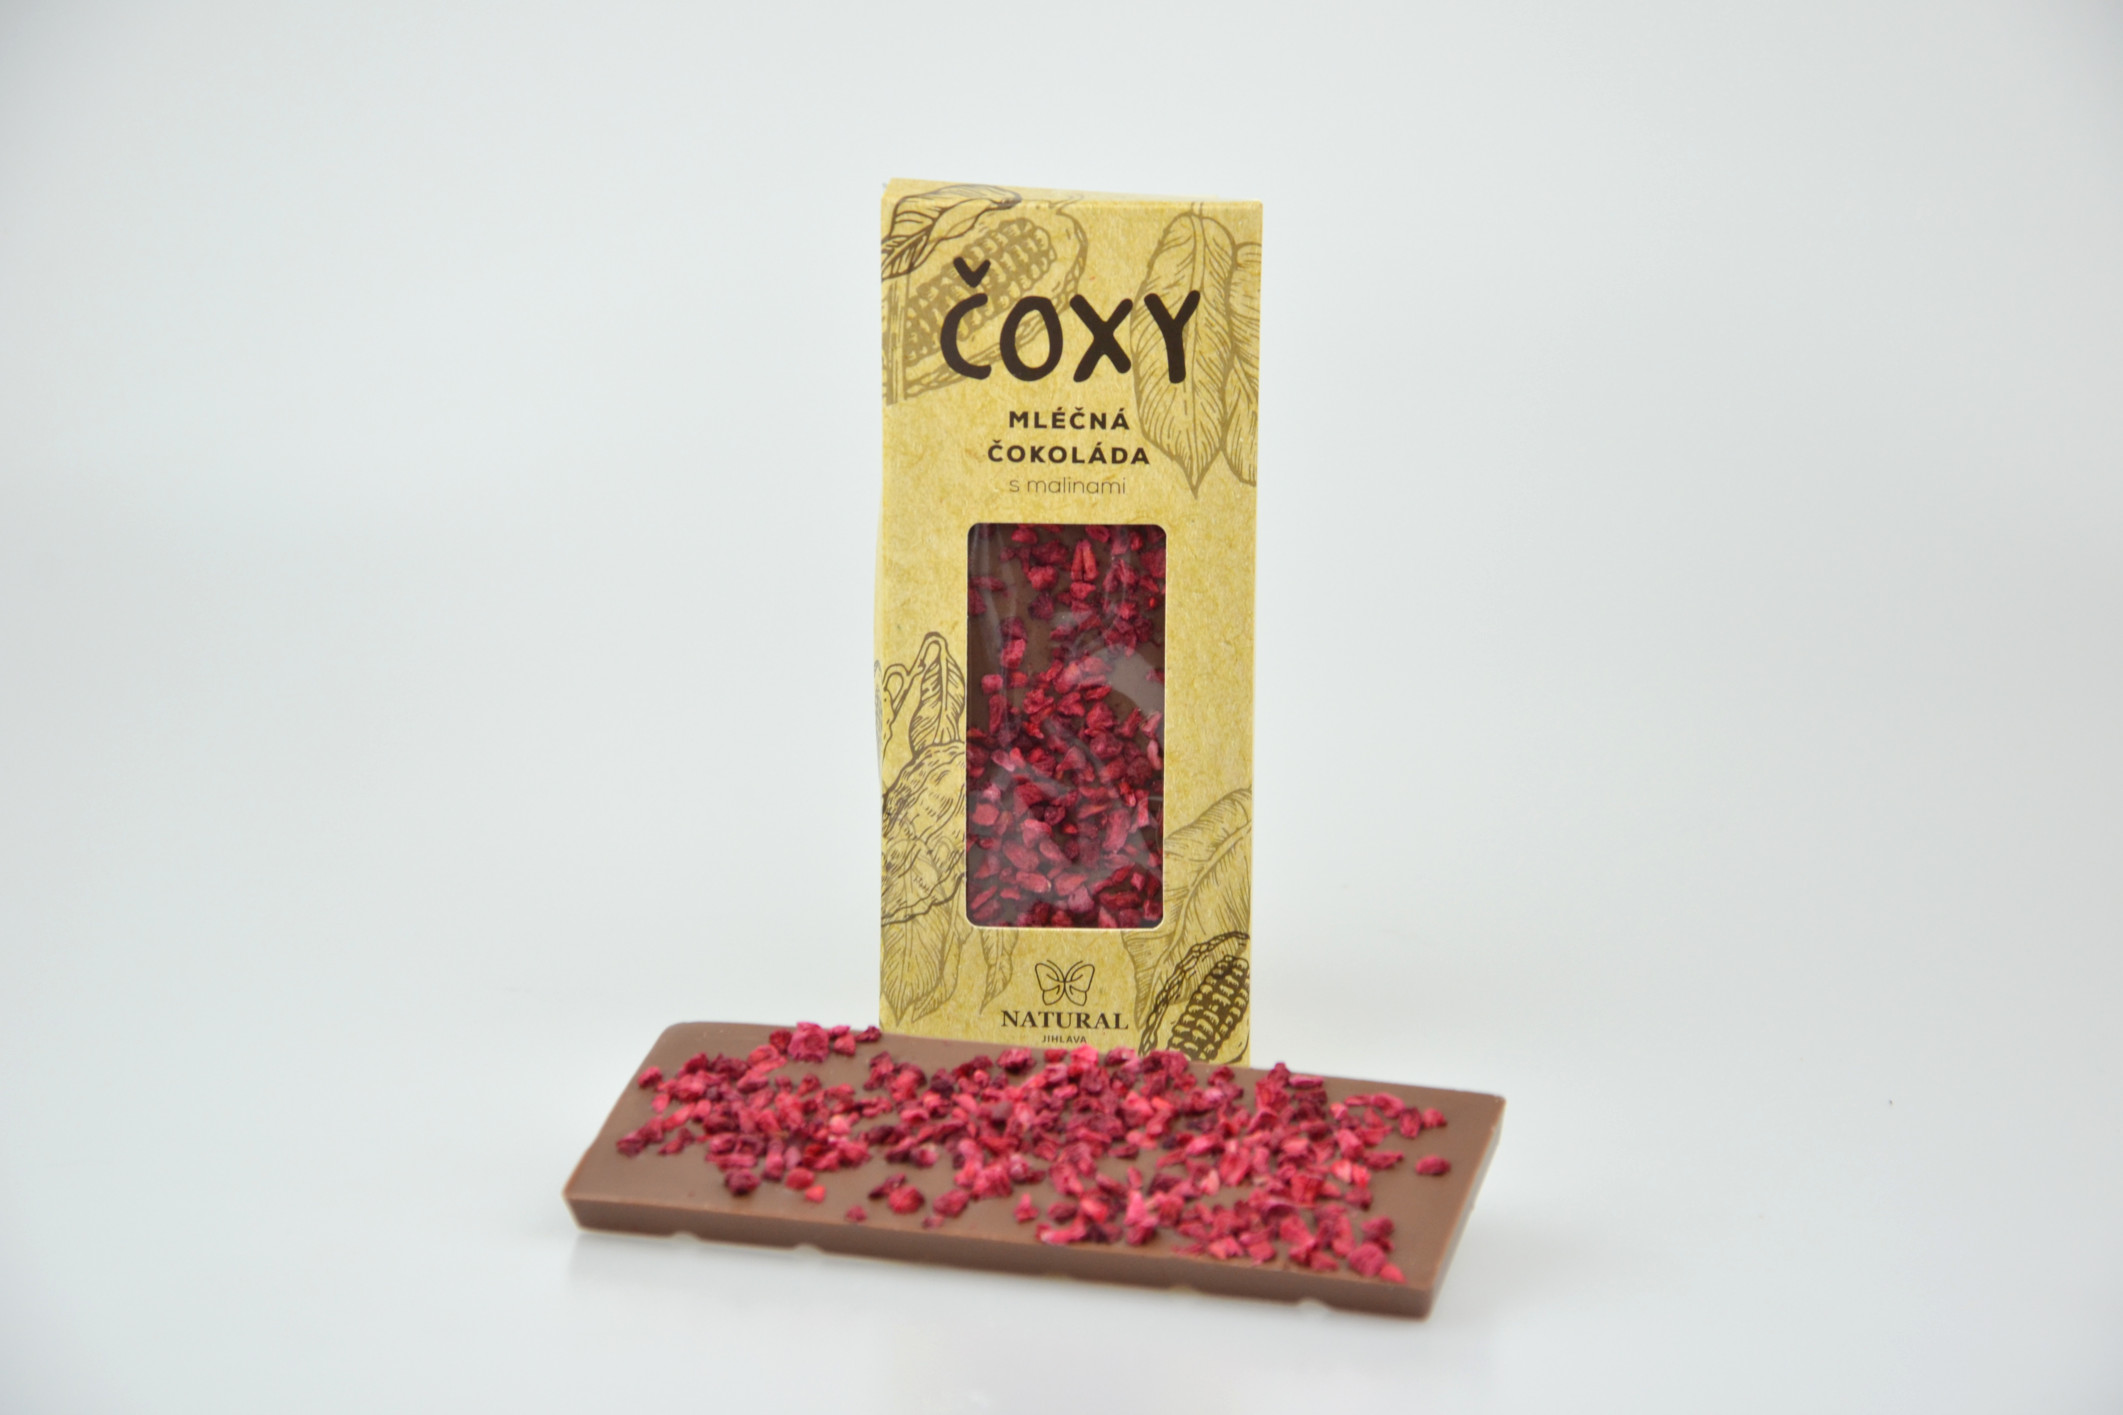 ČOXY - milk chocolate with raspberries and xylitol - Natural 50g